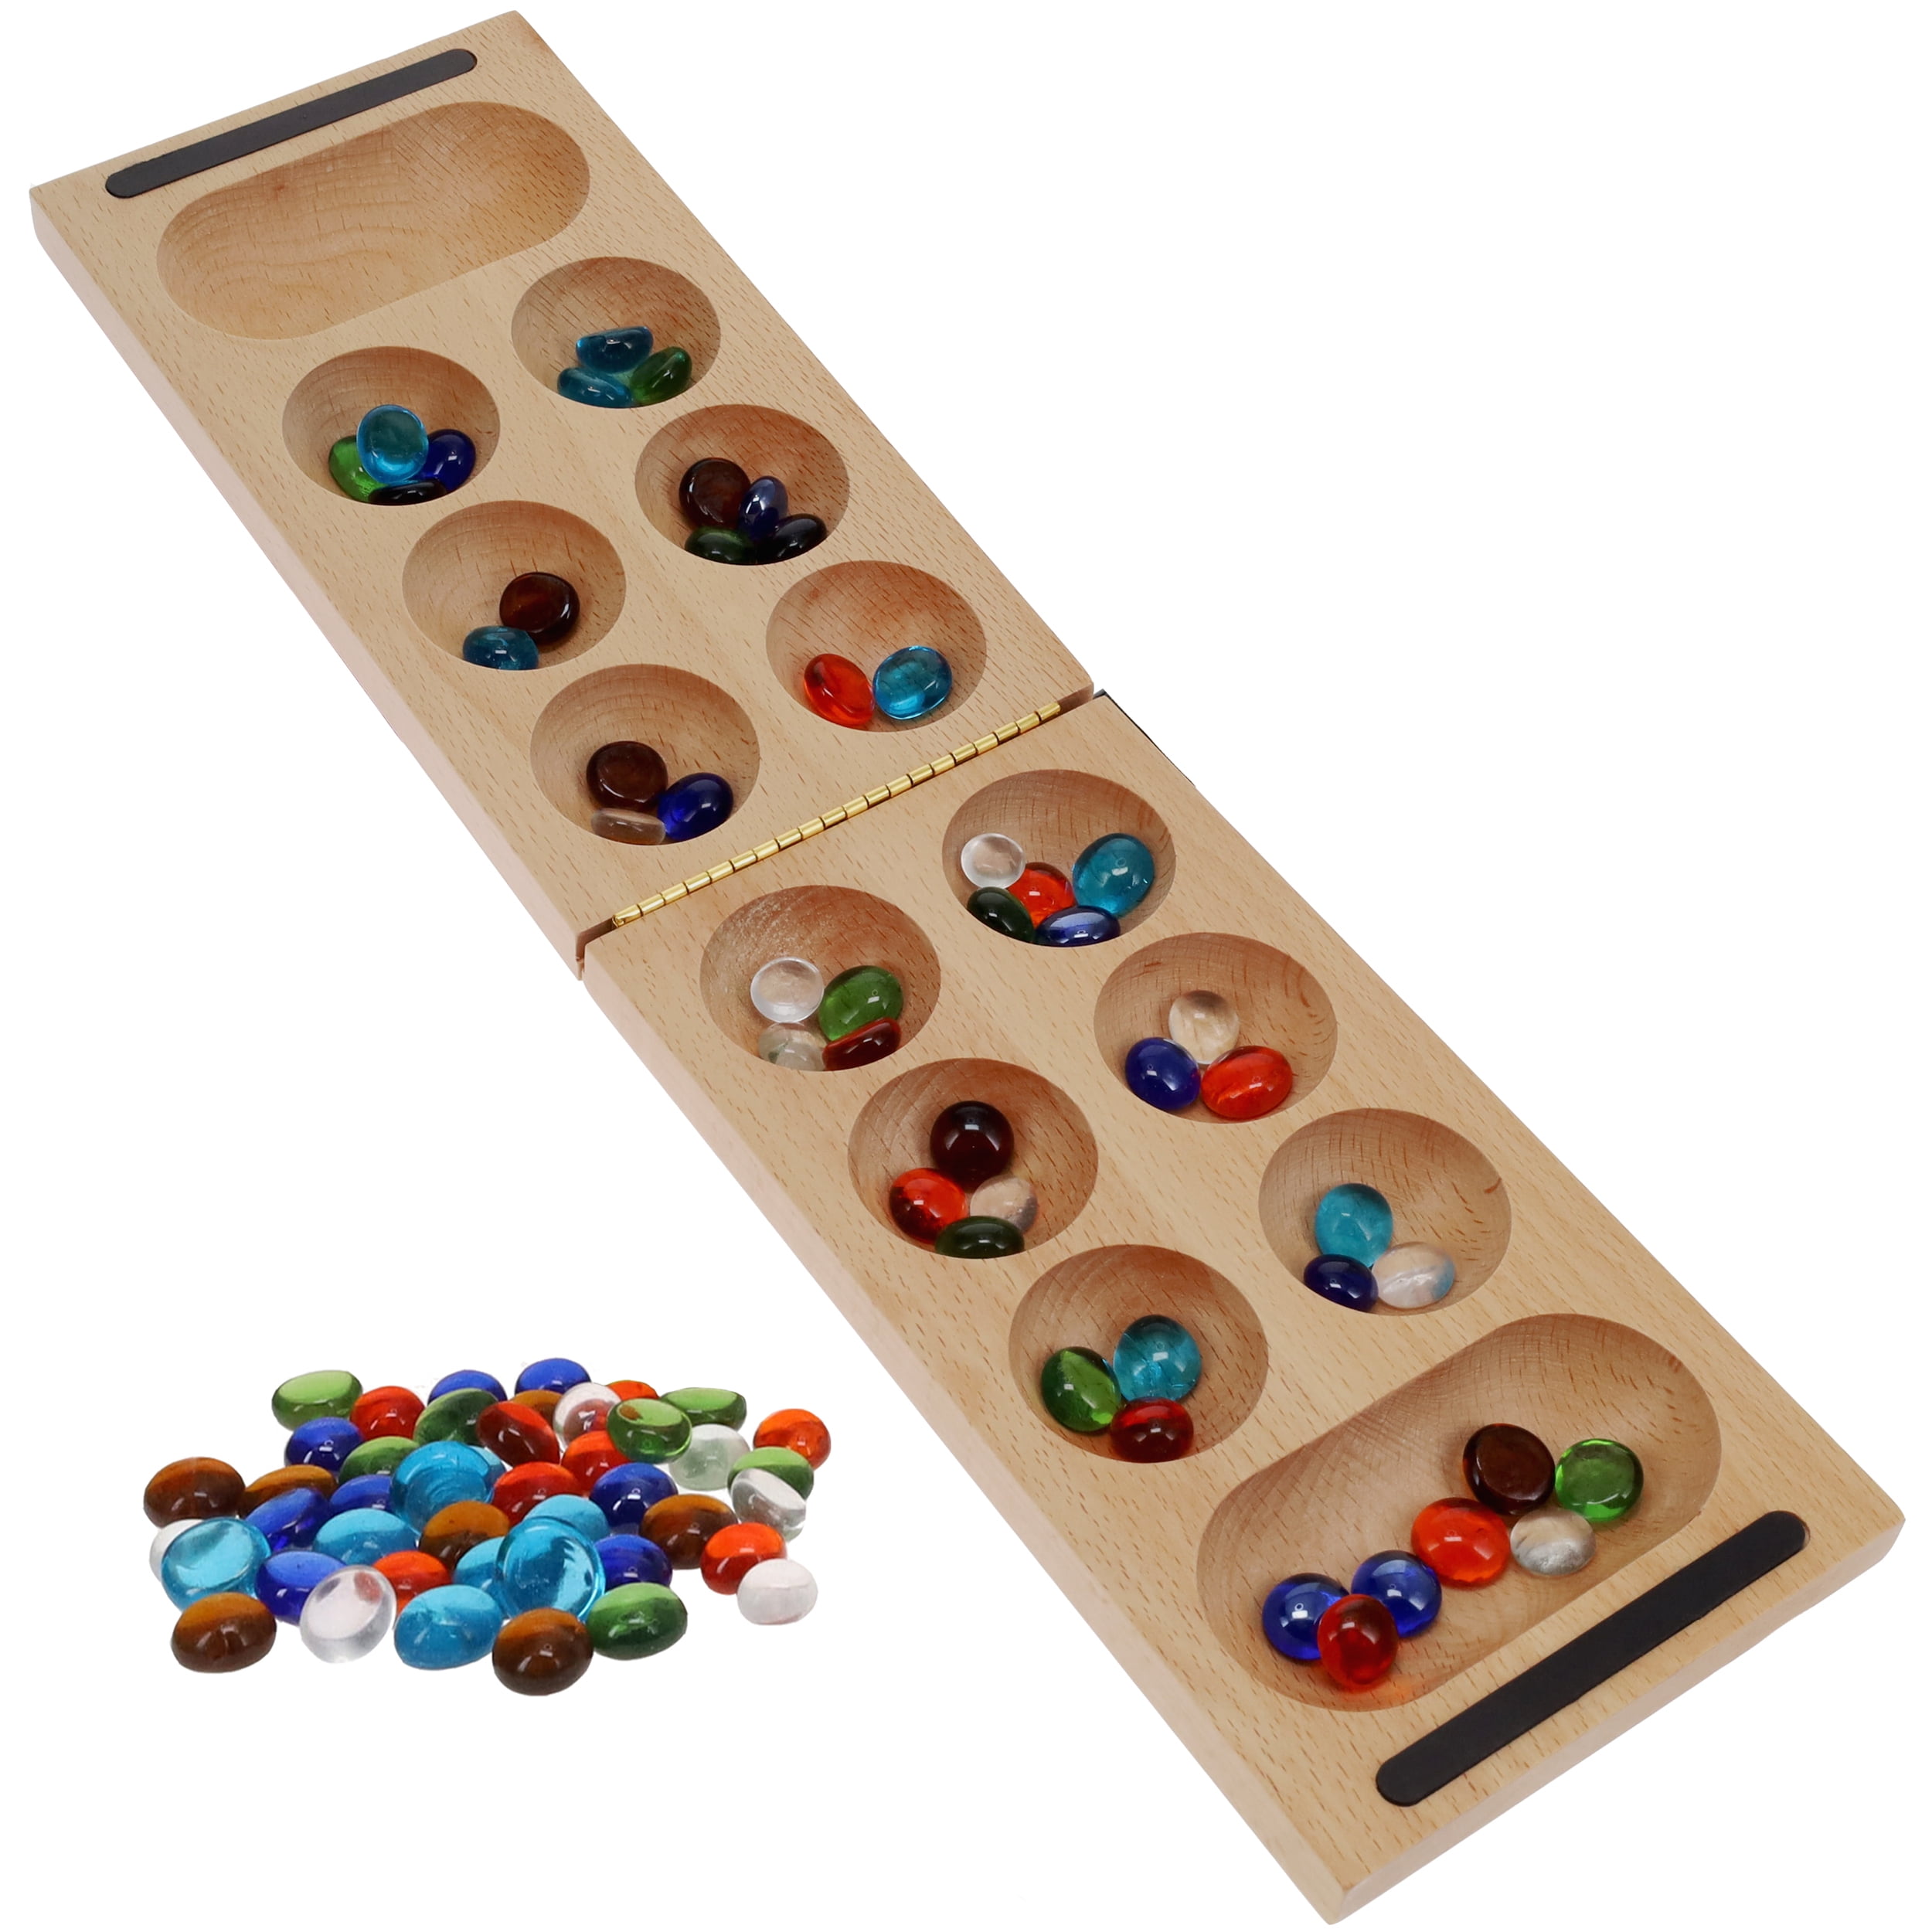 I am working on making my own Mancala game. I can make my own stones but  lack the tools/space/know-how to make the board itself. Would someone be  willing to make a board